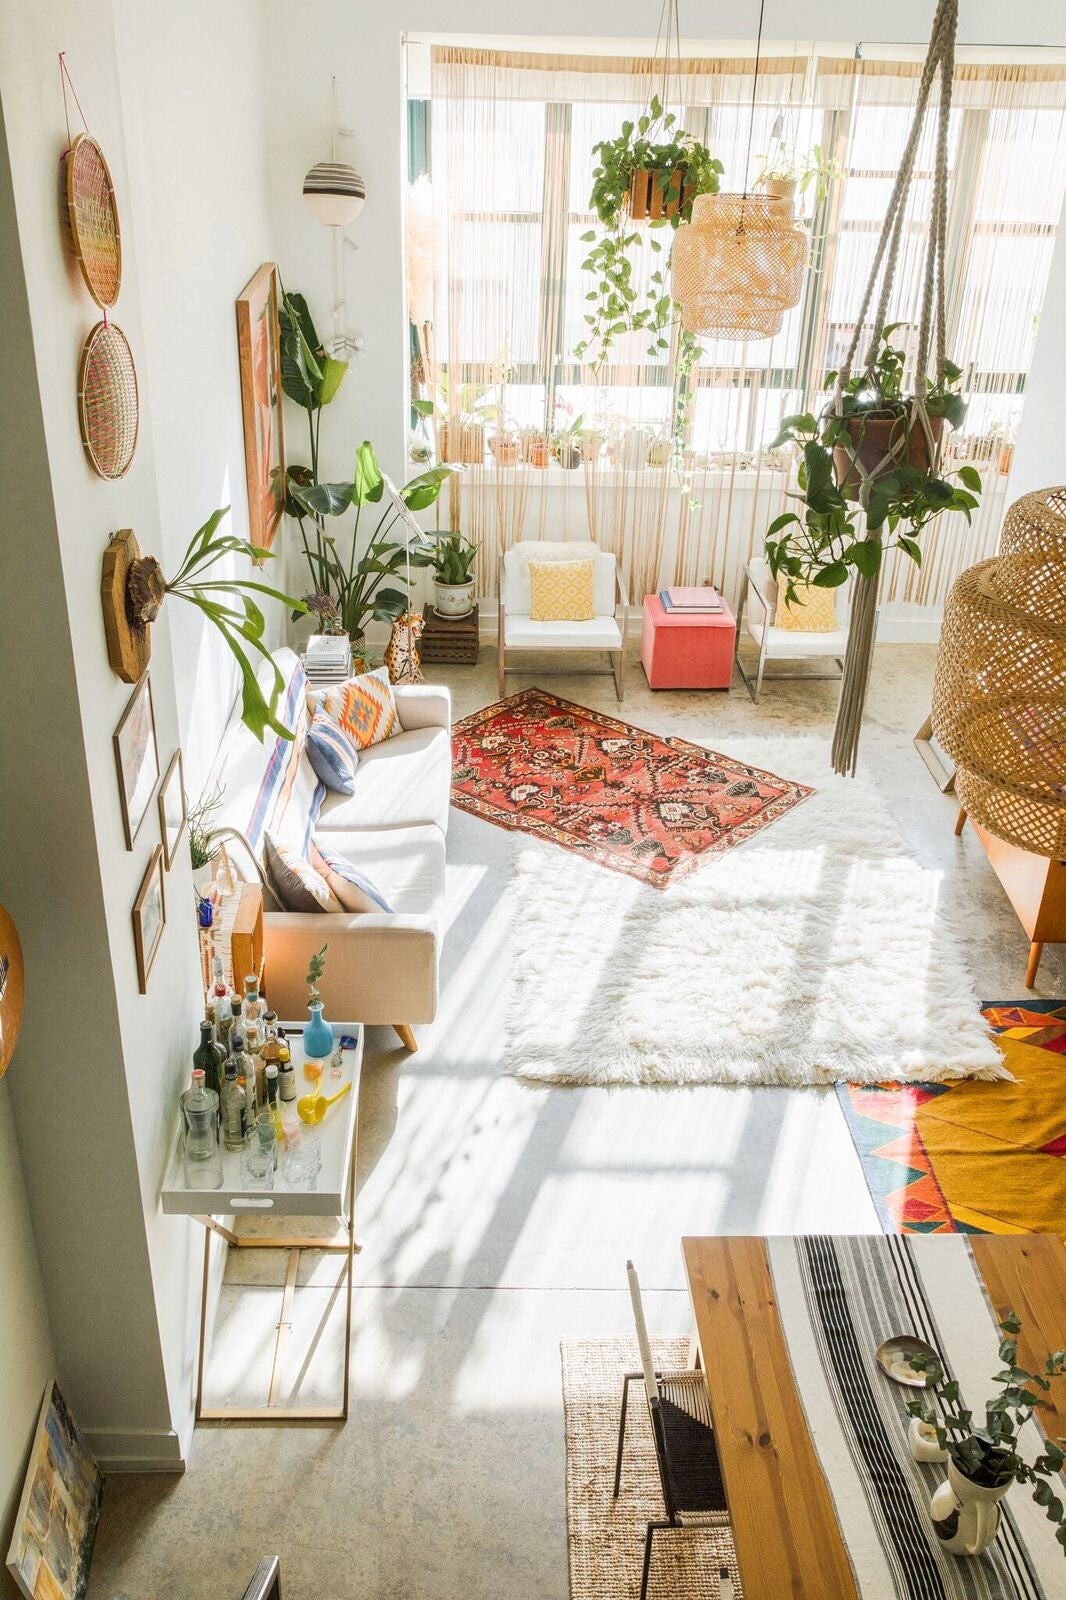 This Colorful, Eclectic Home Used to Be a Factory